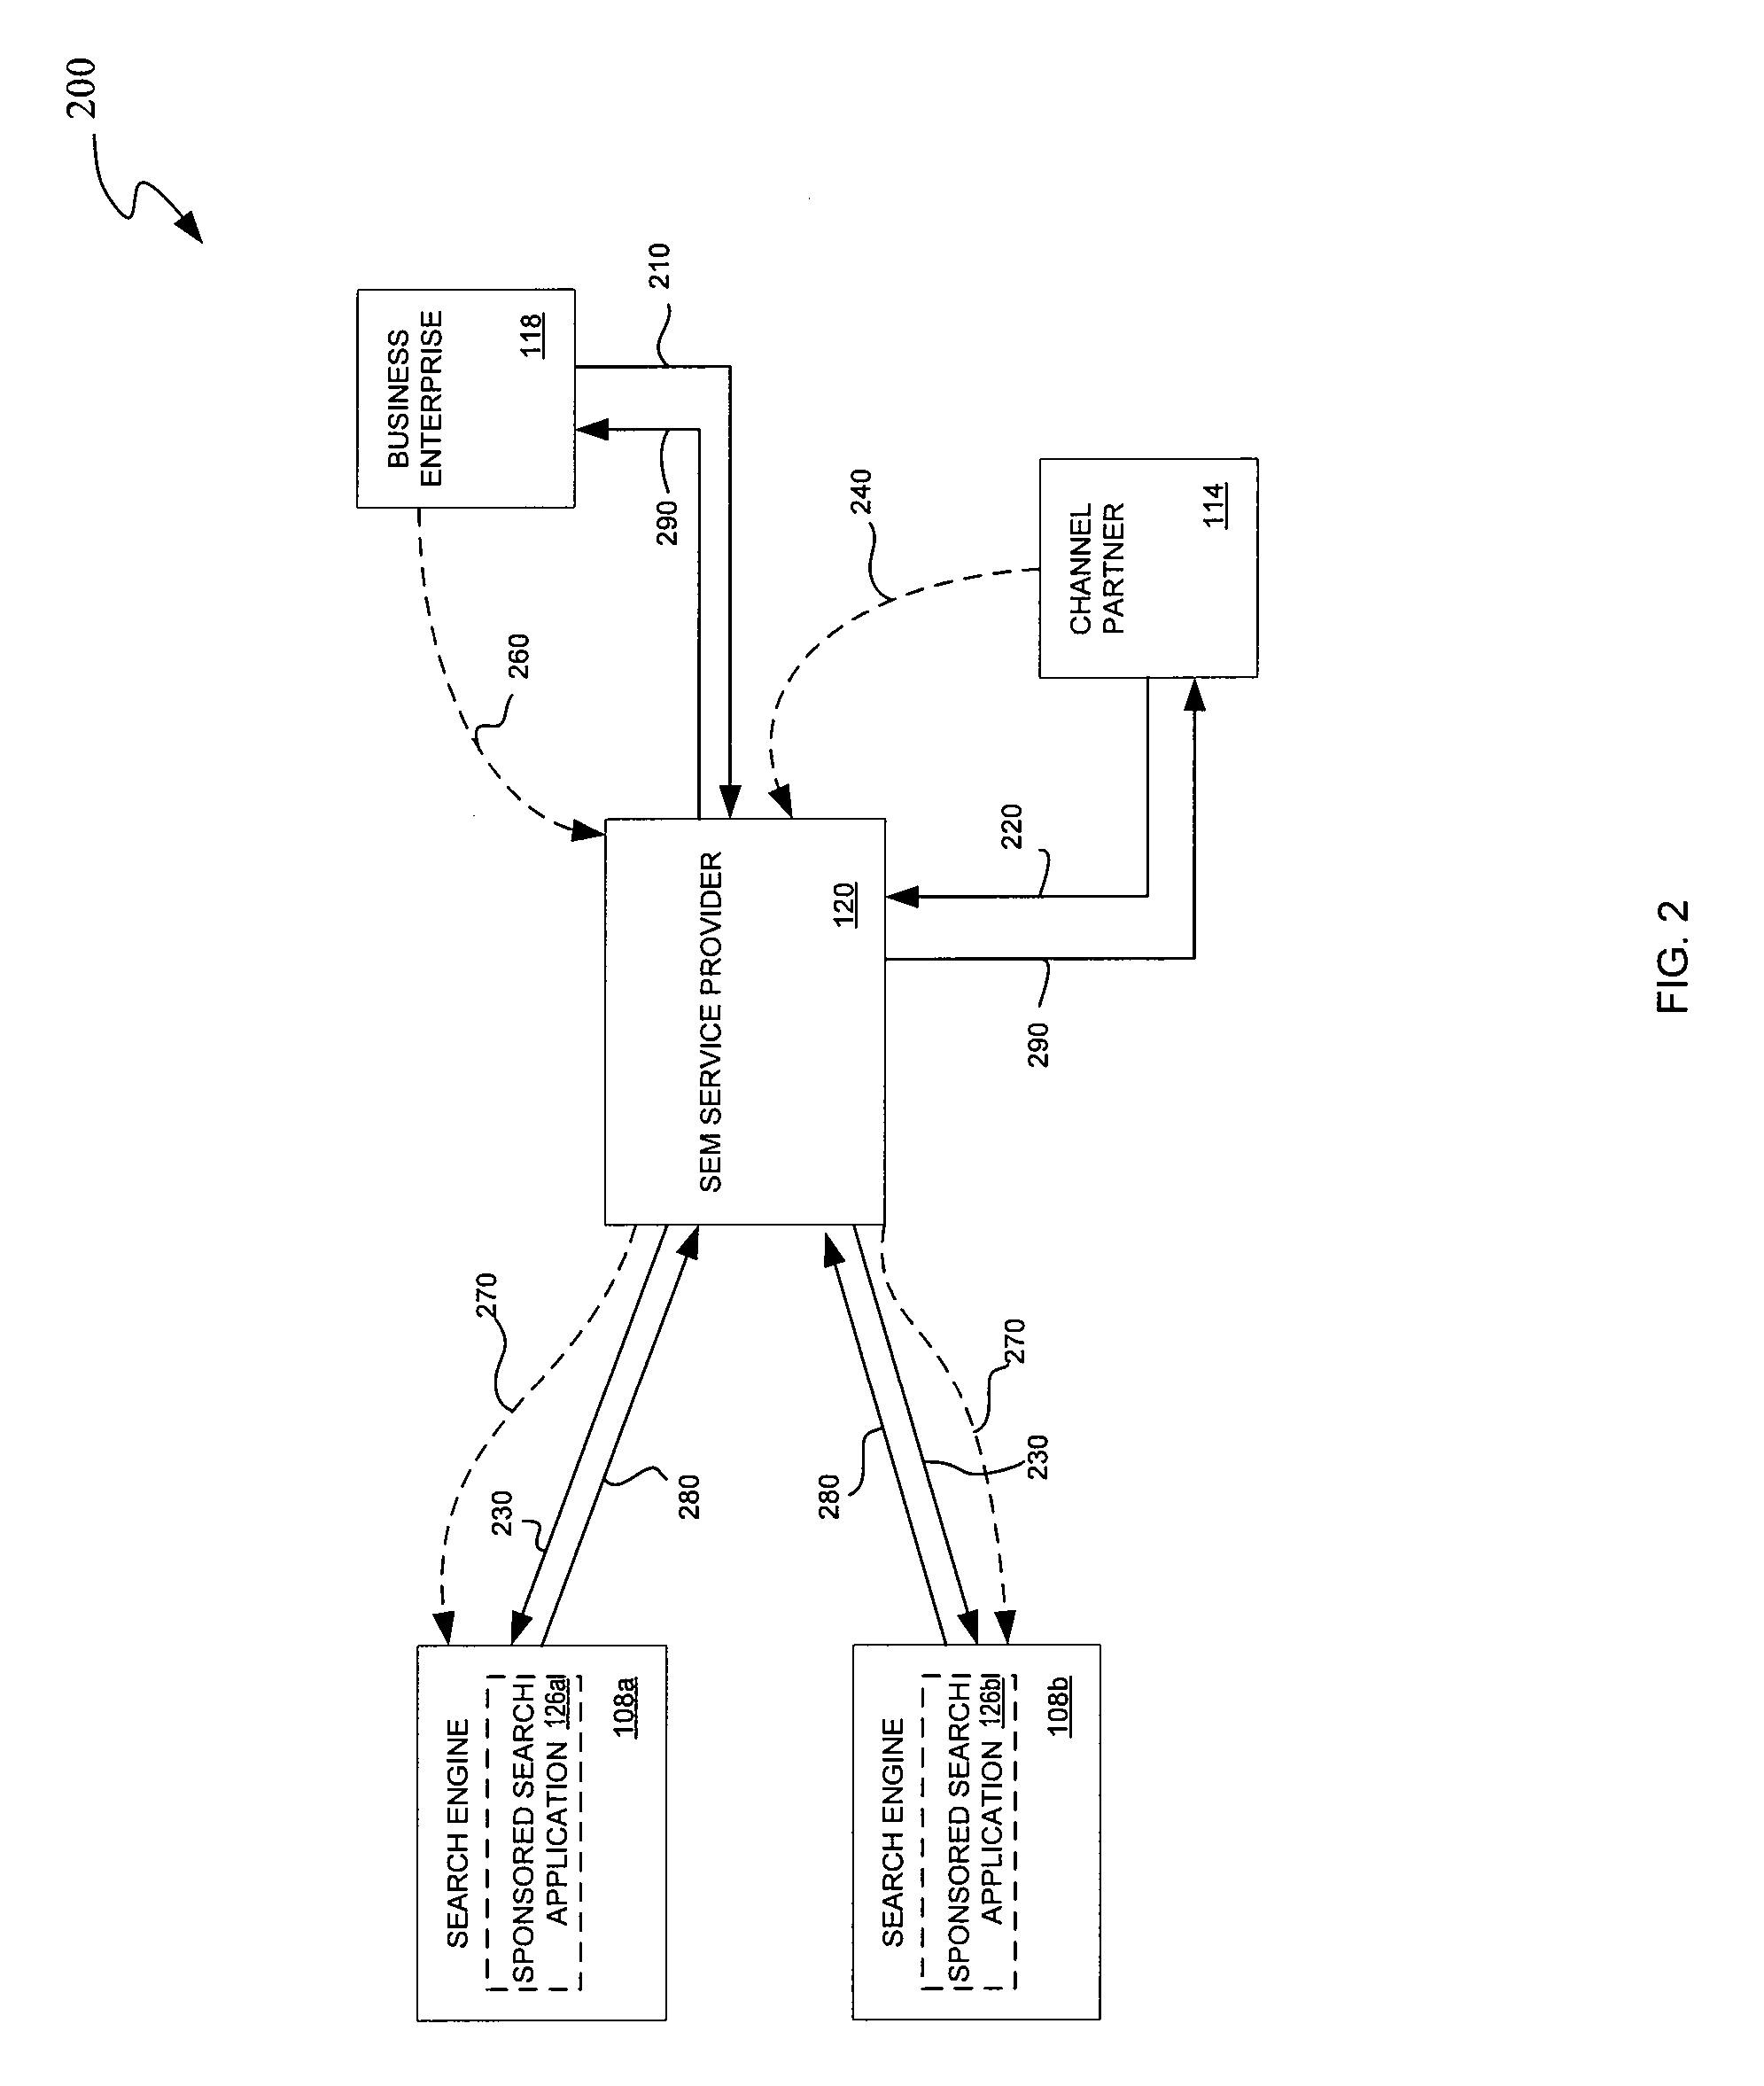 System and method for managing network-based advertising conducted by channel partners of an enterprise